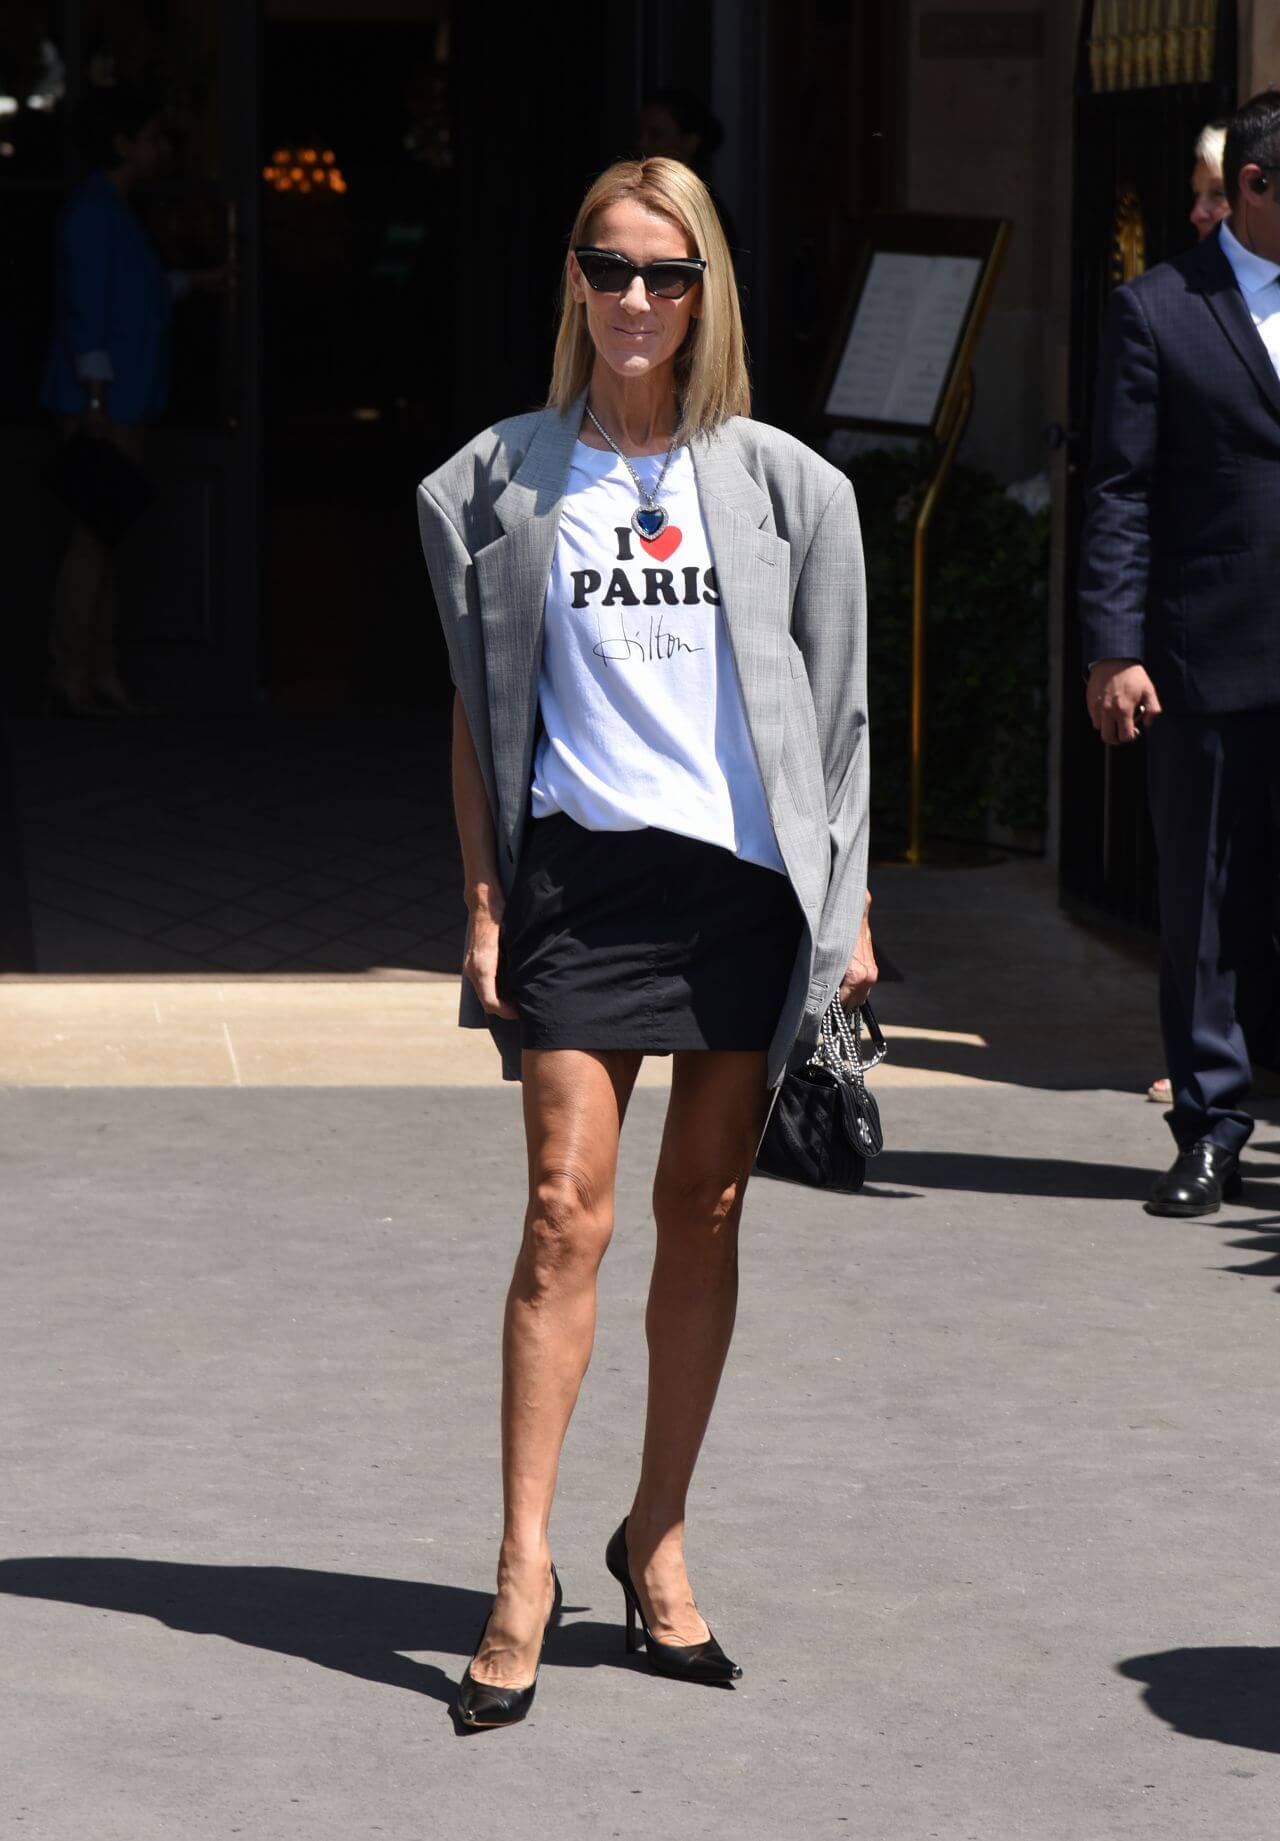 Celine Dion - Outfits ,Style and Looks - K4 Fashion